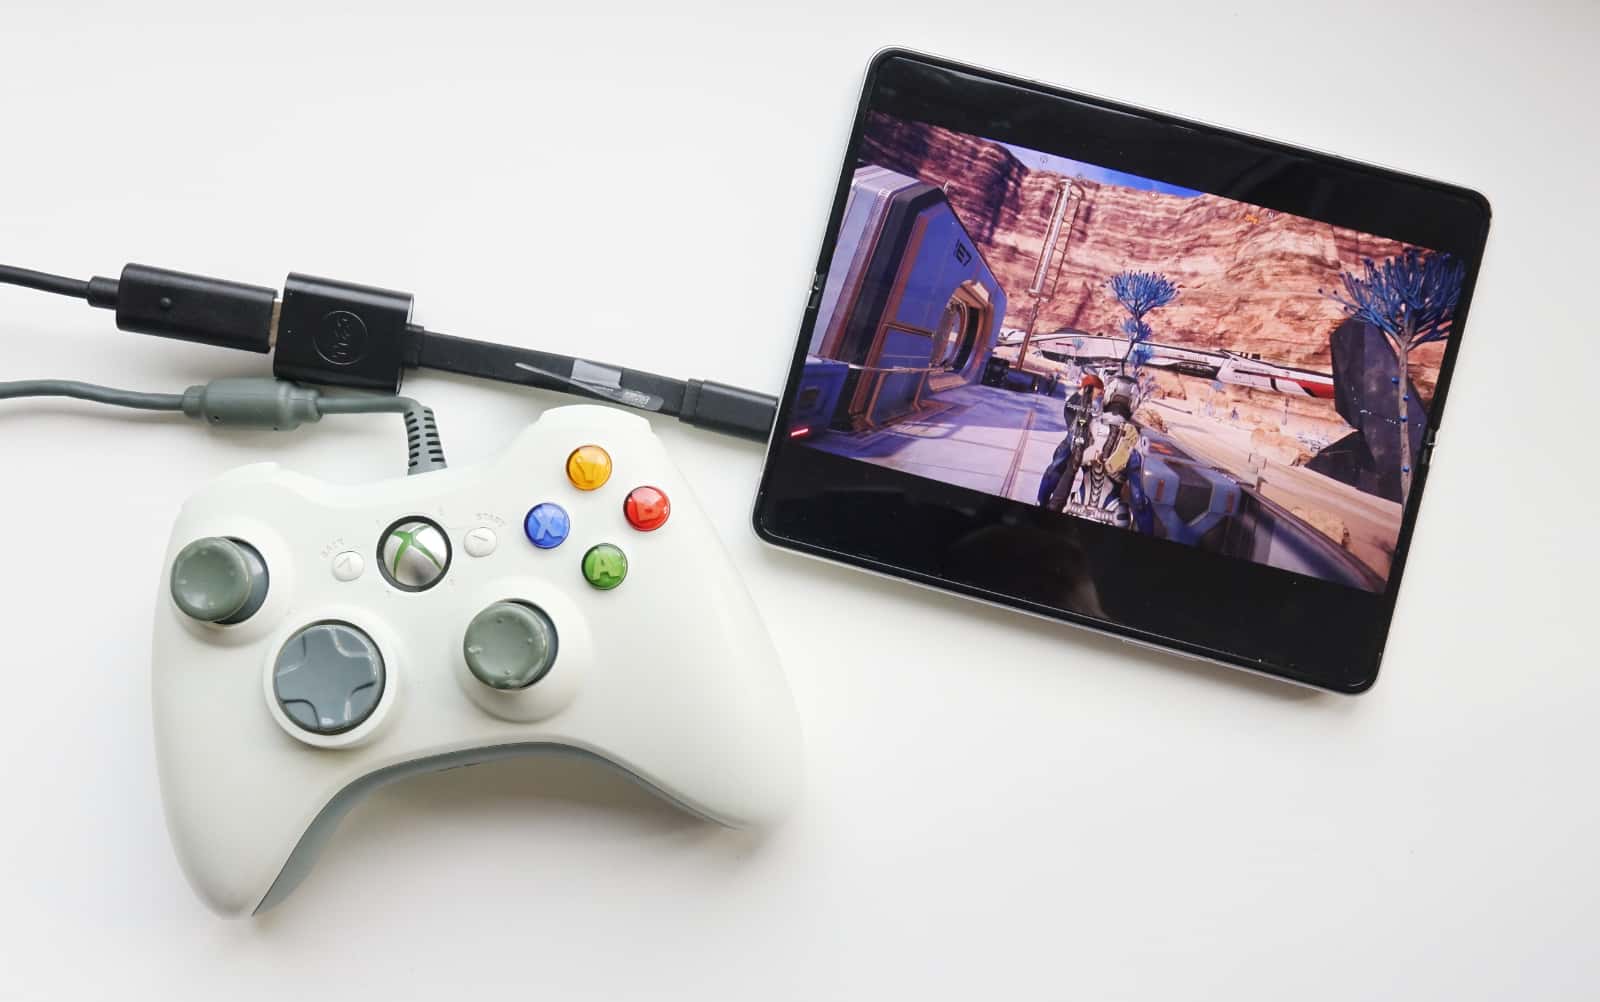 Bring a controller and you can game on the Fold 3.